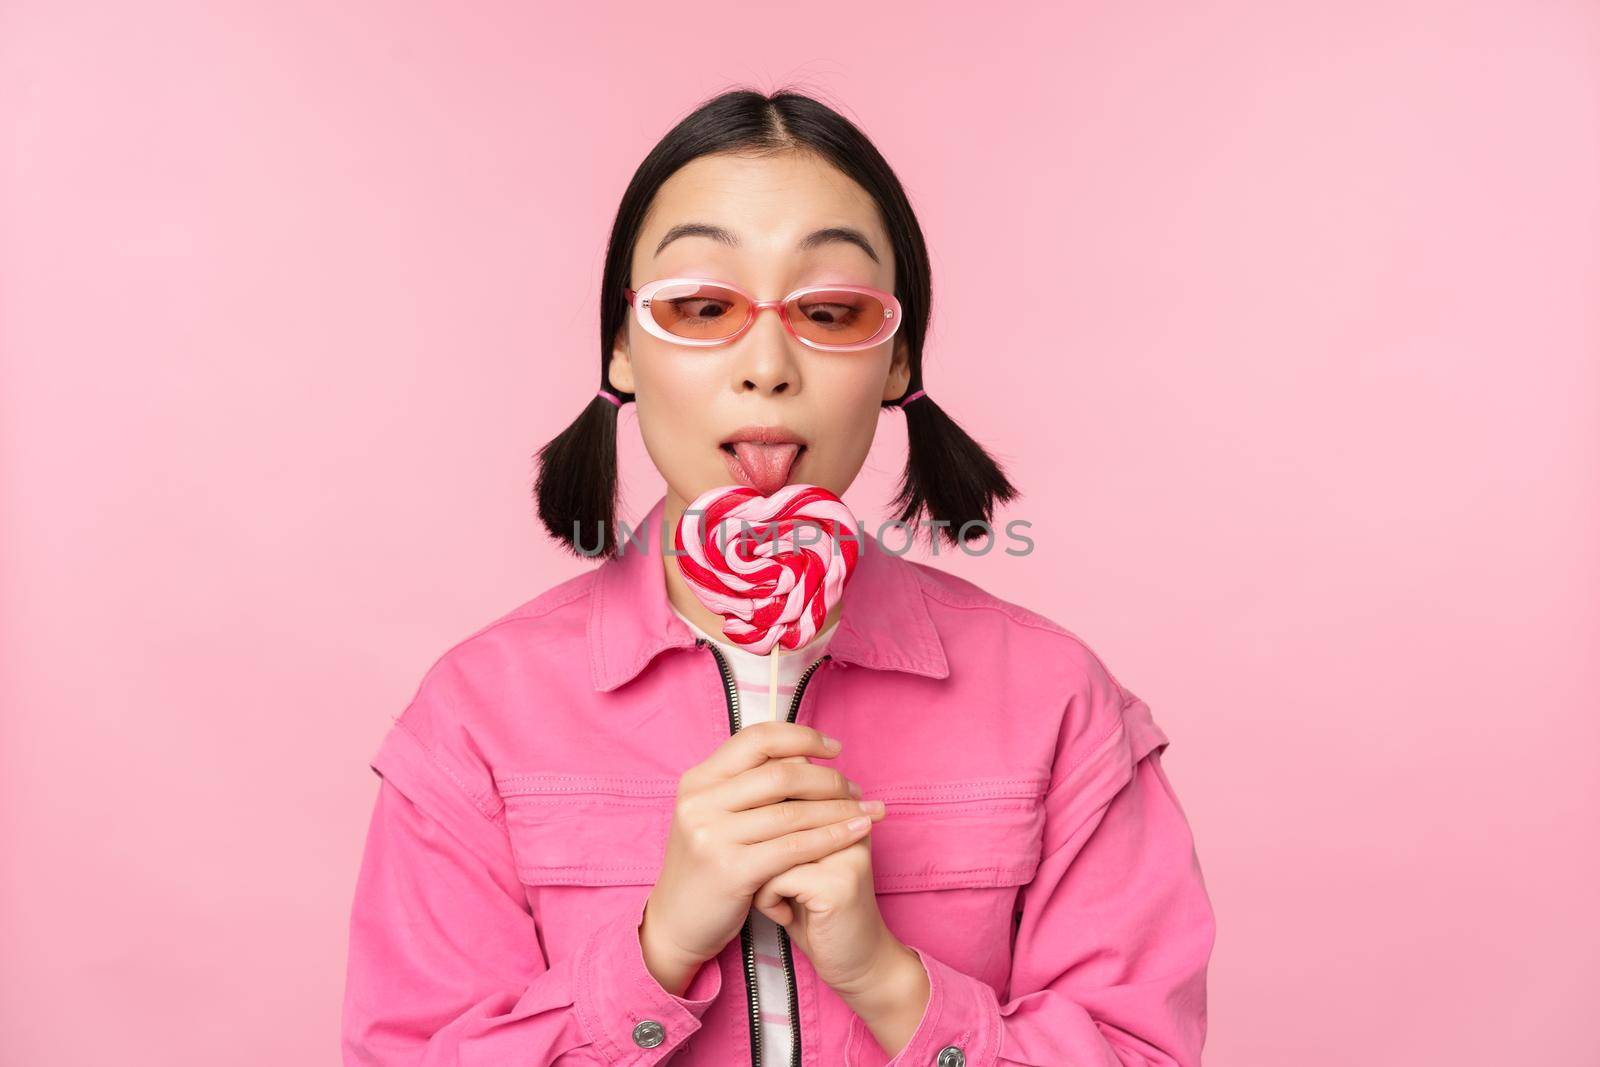 Silly and cute asian female model licking lolipop, eating candy sweet and smiling, looking excited, standing over pink background by Benzoix